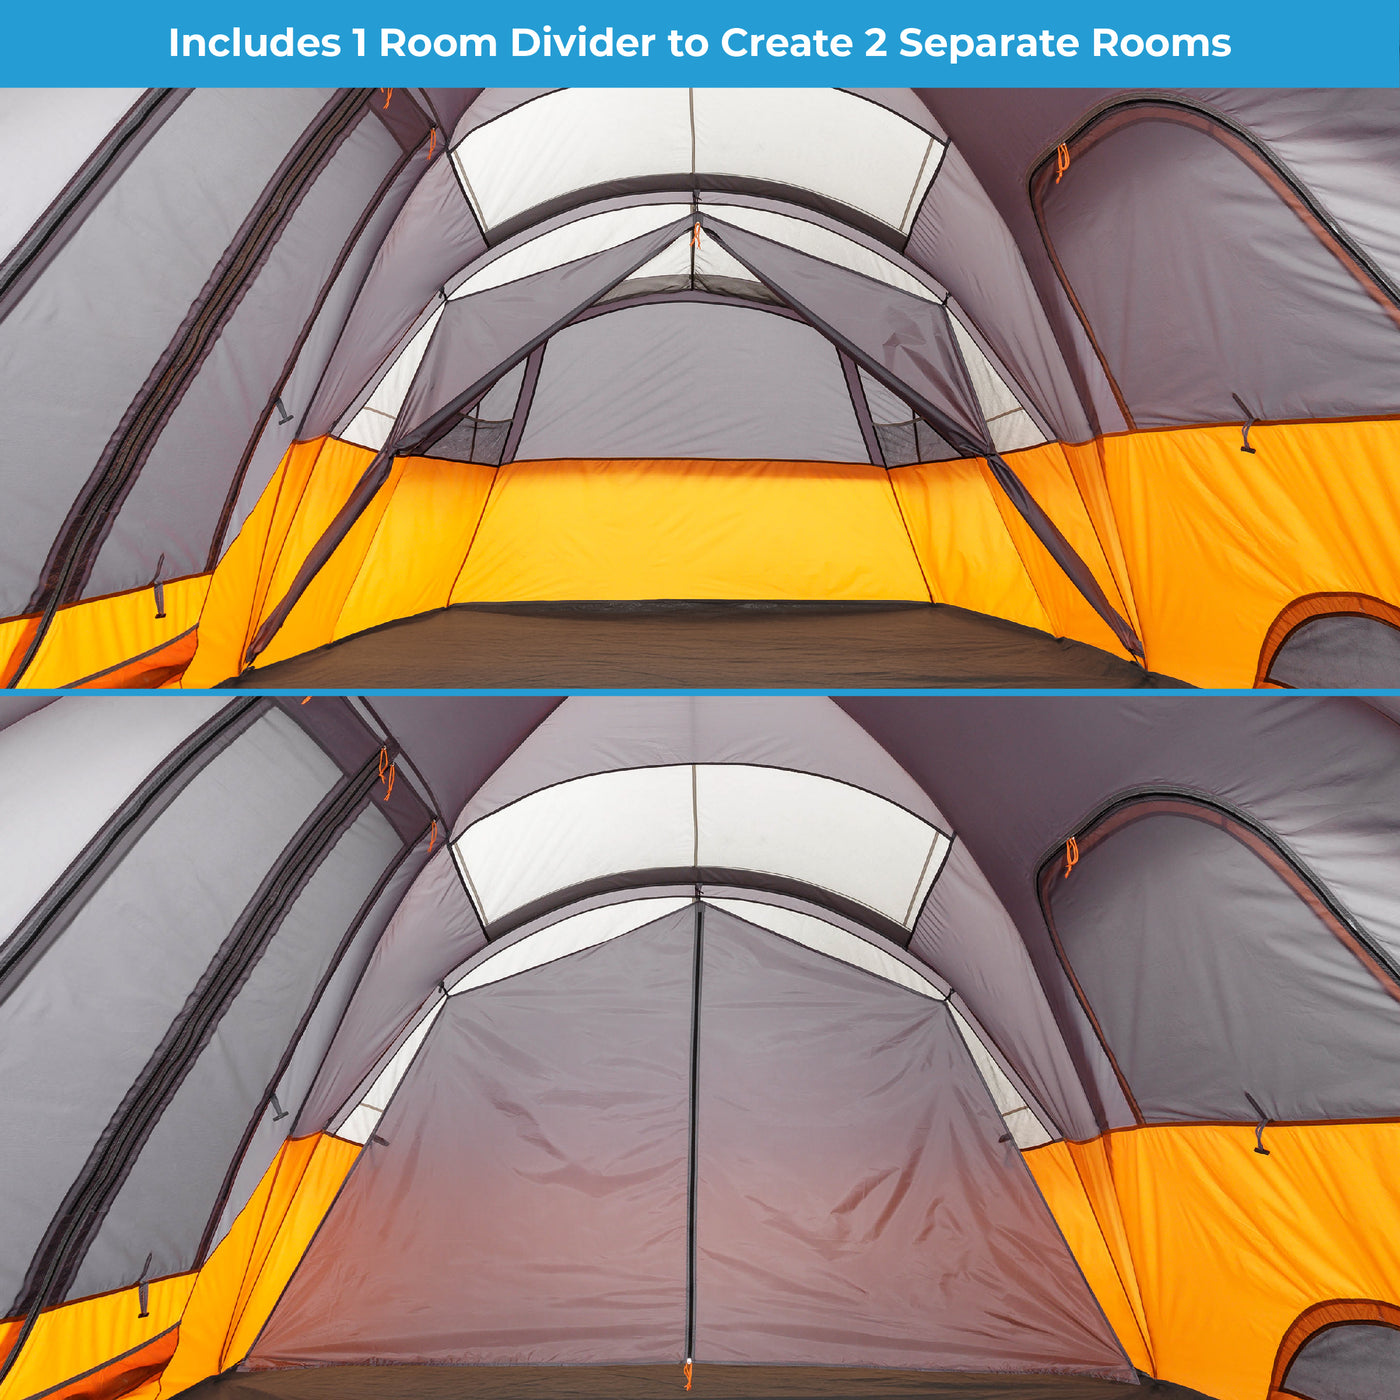 11 Person Extended Dome Tent 18' x 9'